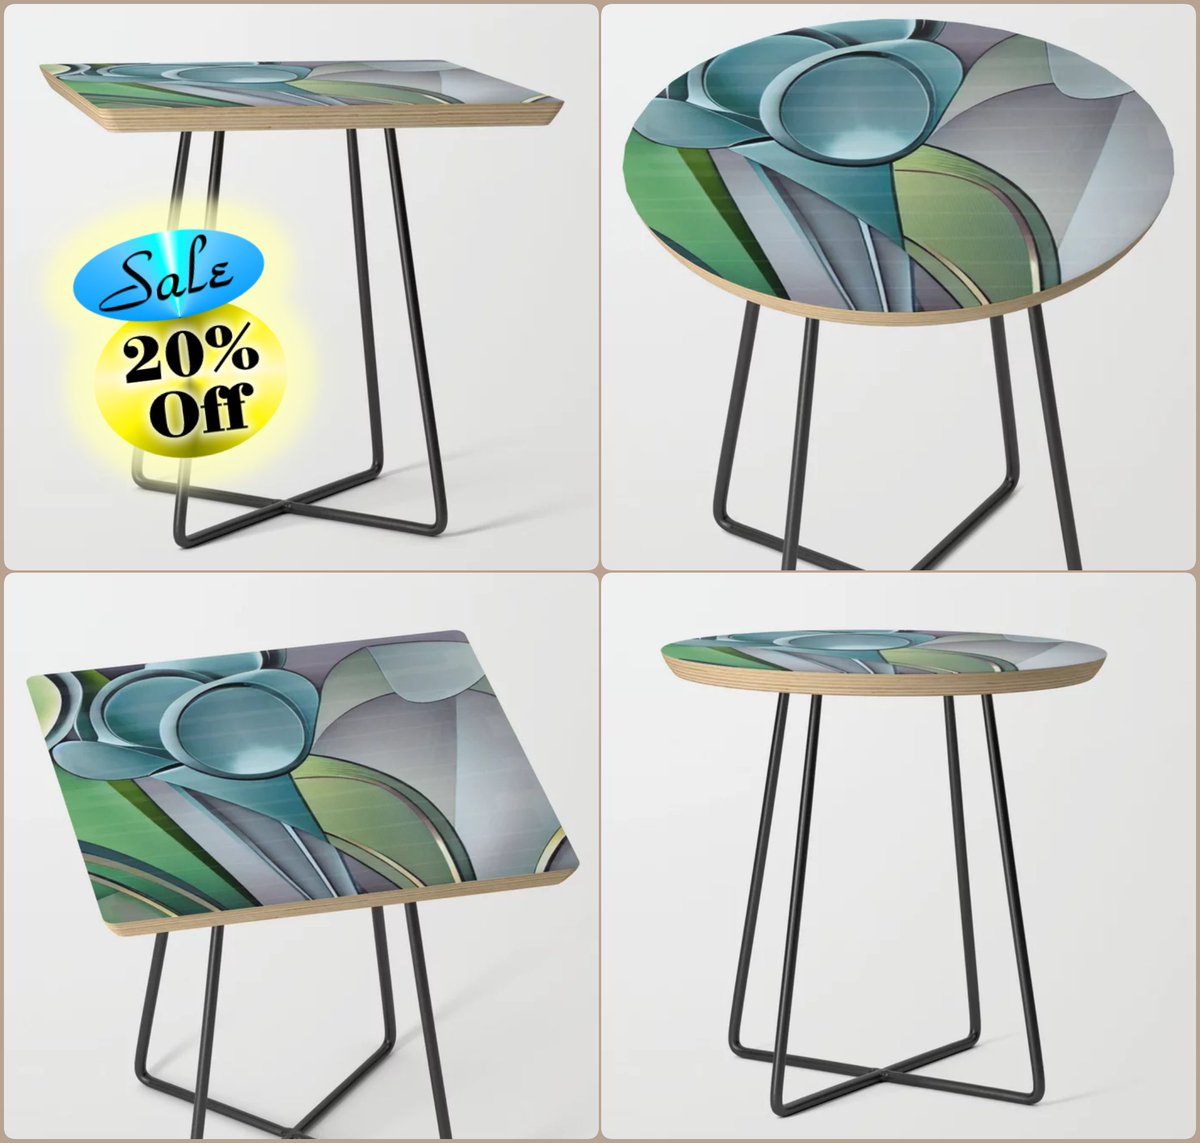 *SALE 20% Off* Fountain Sphere Side Table~by Art Falaxy~ ~Unique Home Decor~ #artfalaxy #art #furniture #tables #homedecor #society6 #modern #accents #interior #trendy #credenza #dressers #stools #coffee society6.com/product/founta… COLLECTION: society6.com/art/fountain-s…